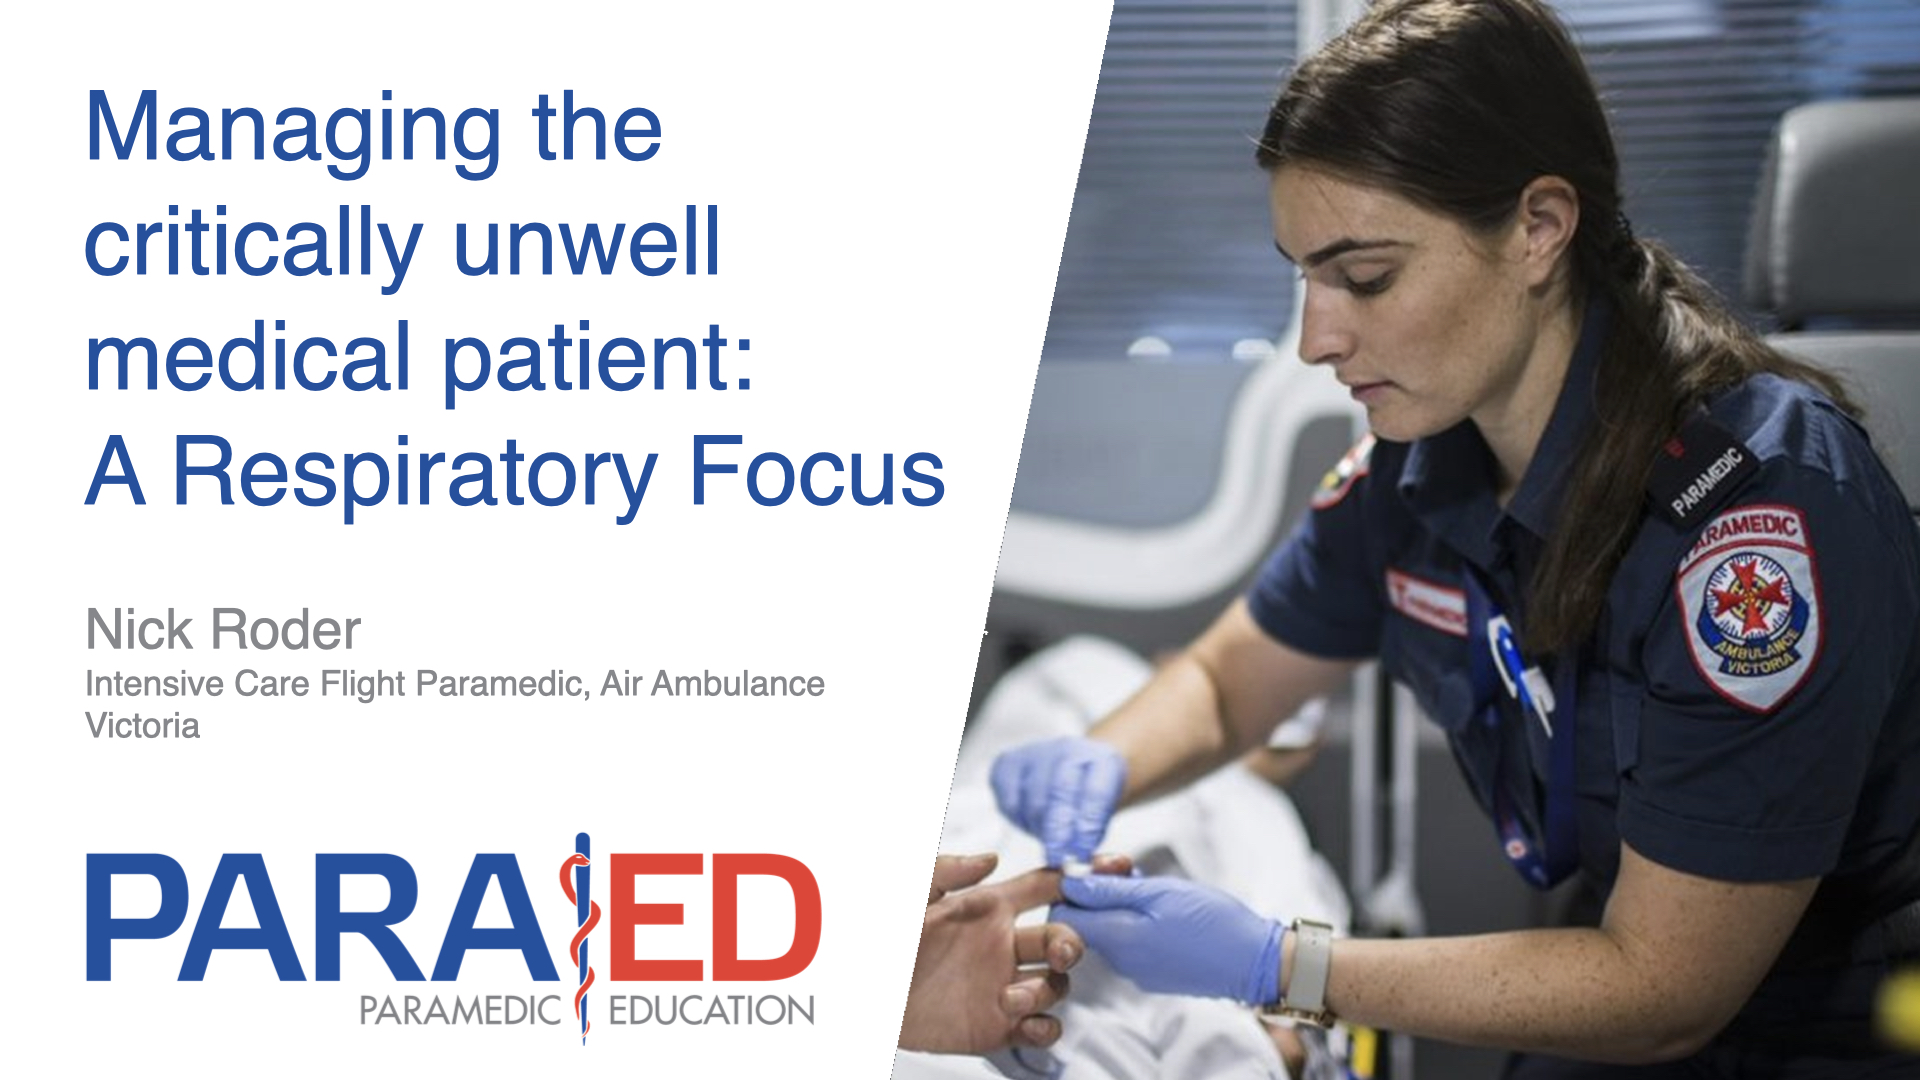 Managing the critically unwell medical patient: A Respiratory Focus